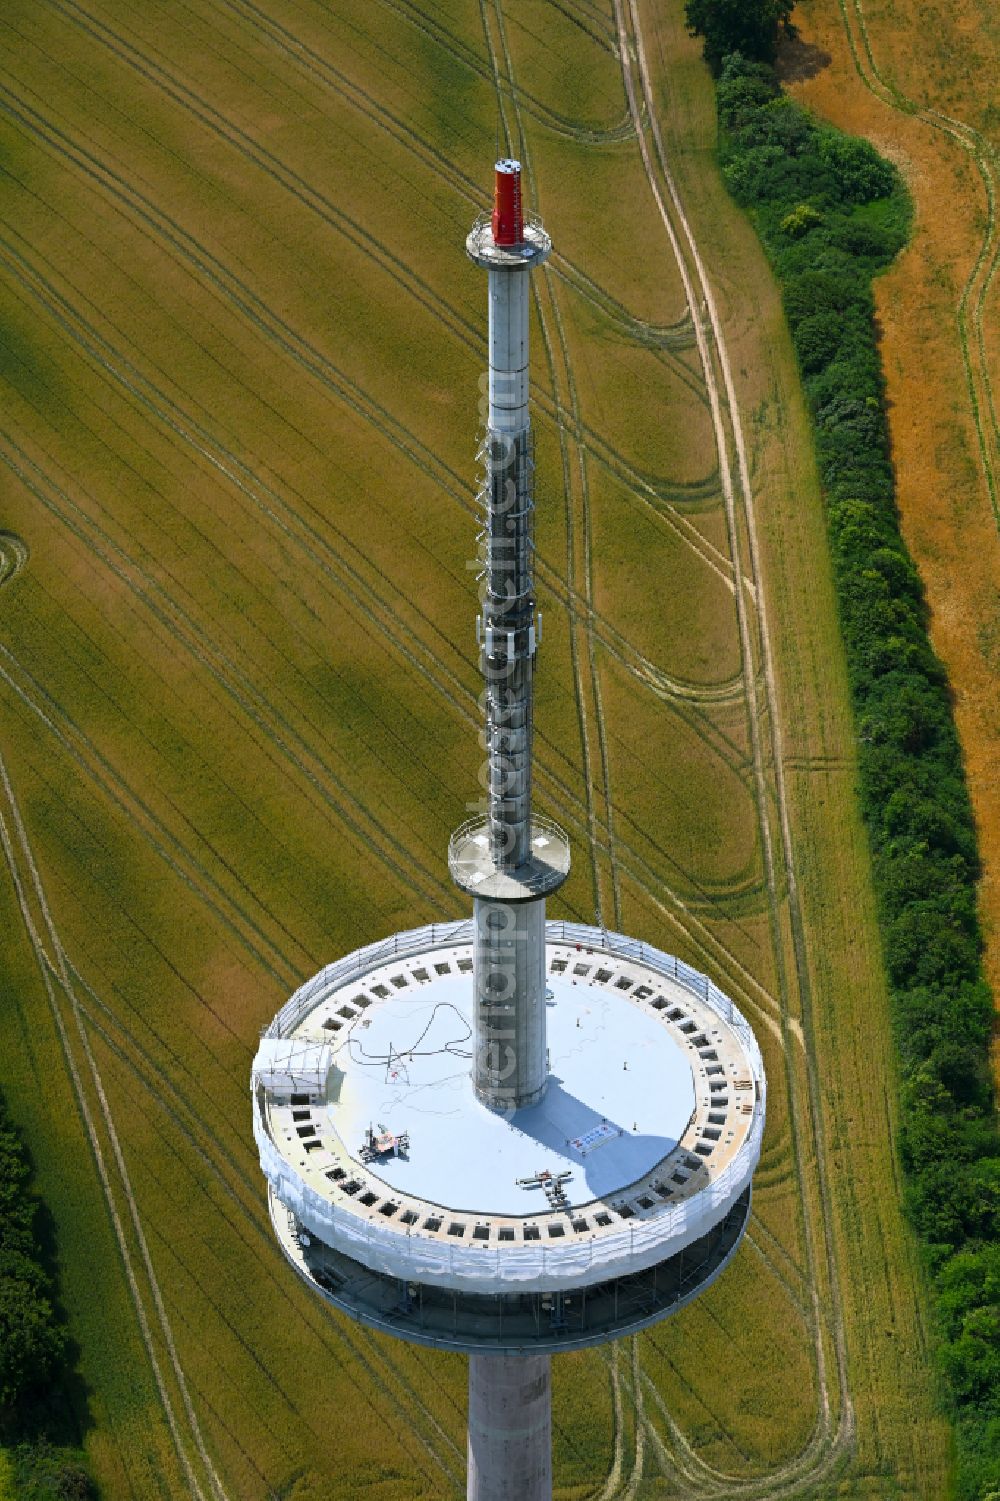 Kleinwolstrup from above - Funkturm and transmission system as basic network transmitter Sendeturm Freienwill on street Am Sender in Kleinwolstrup in the state Schleswig-Holstein, Germany